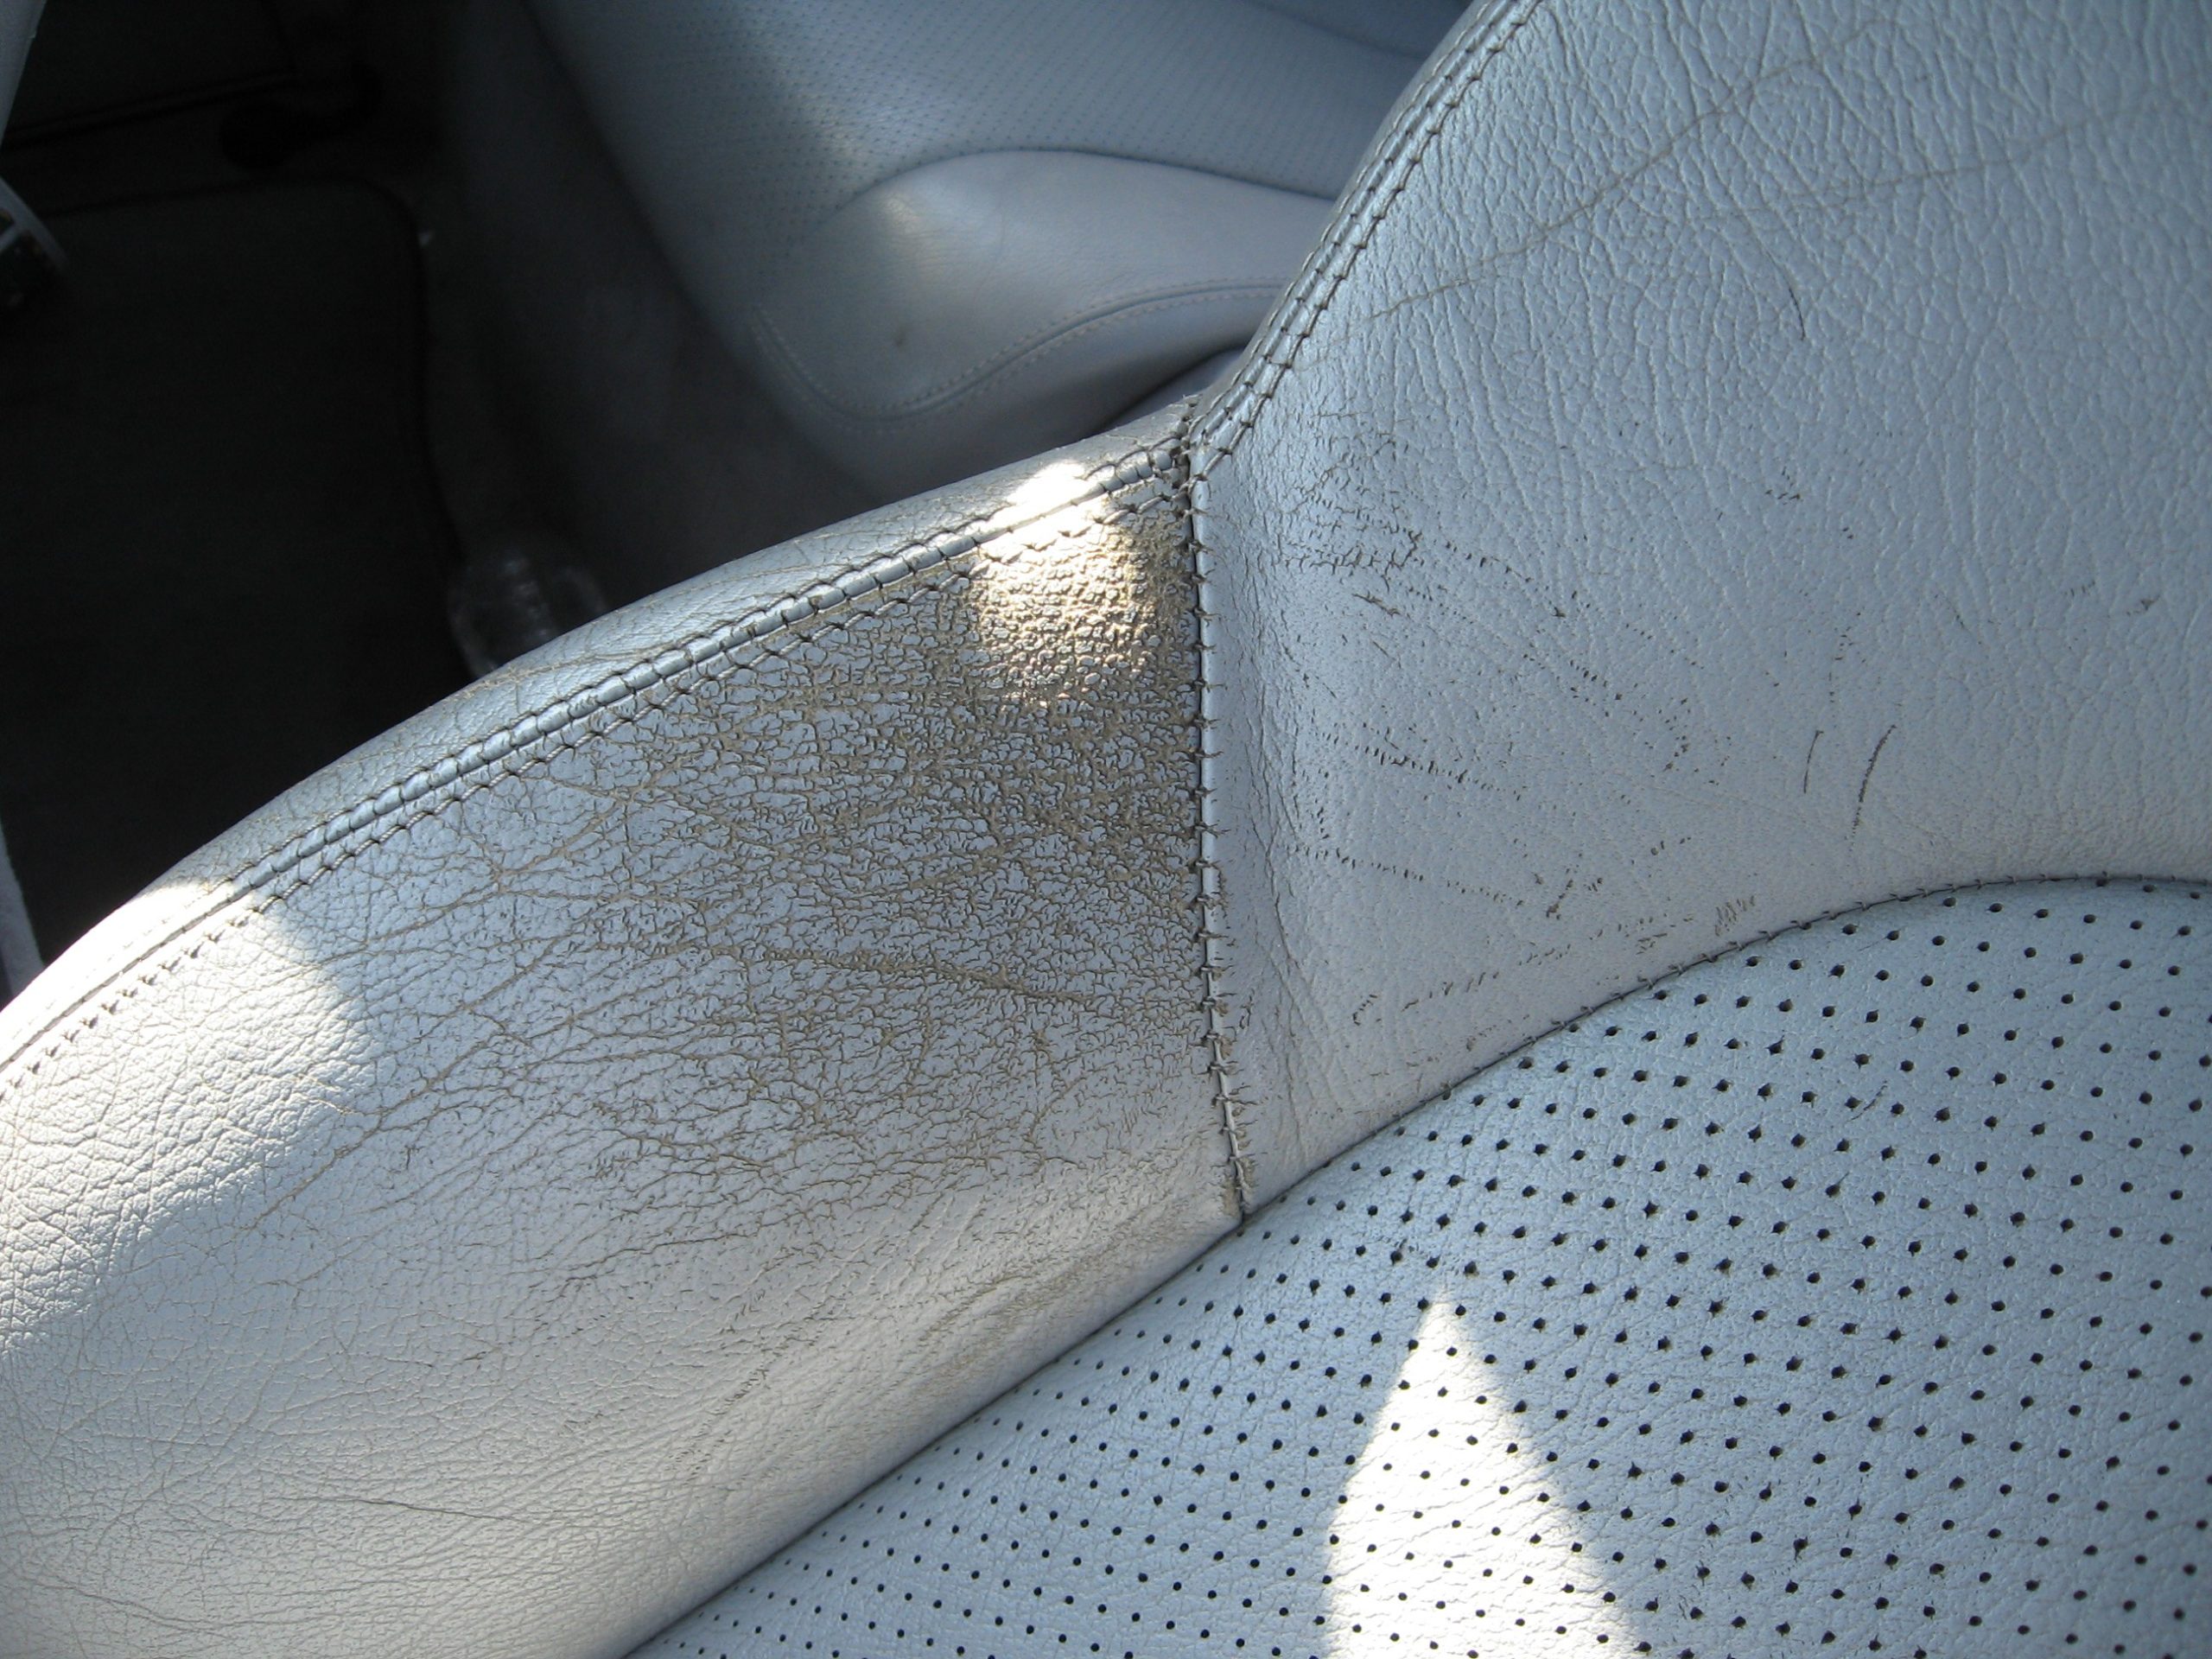 Perforated Leather: How to Clean Leather Seats with Holes